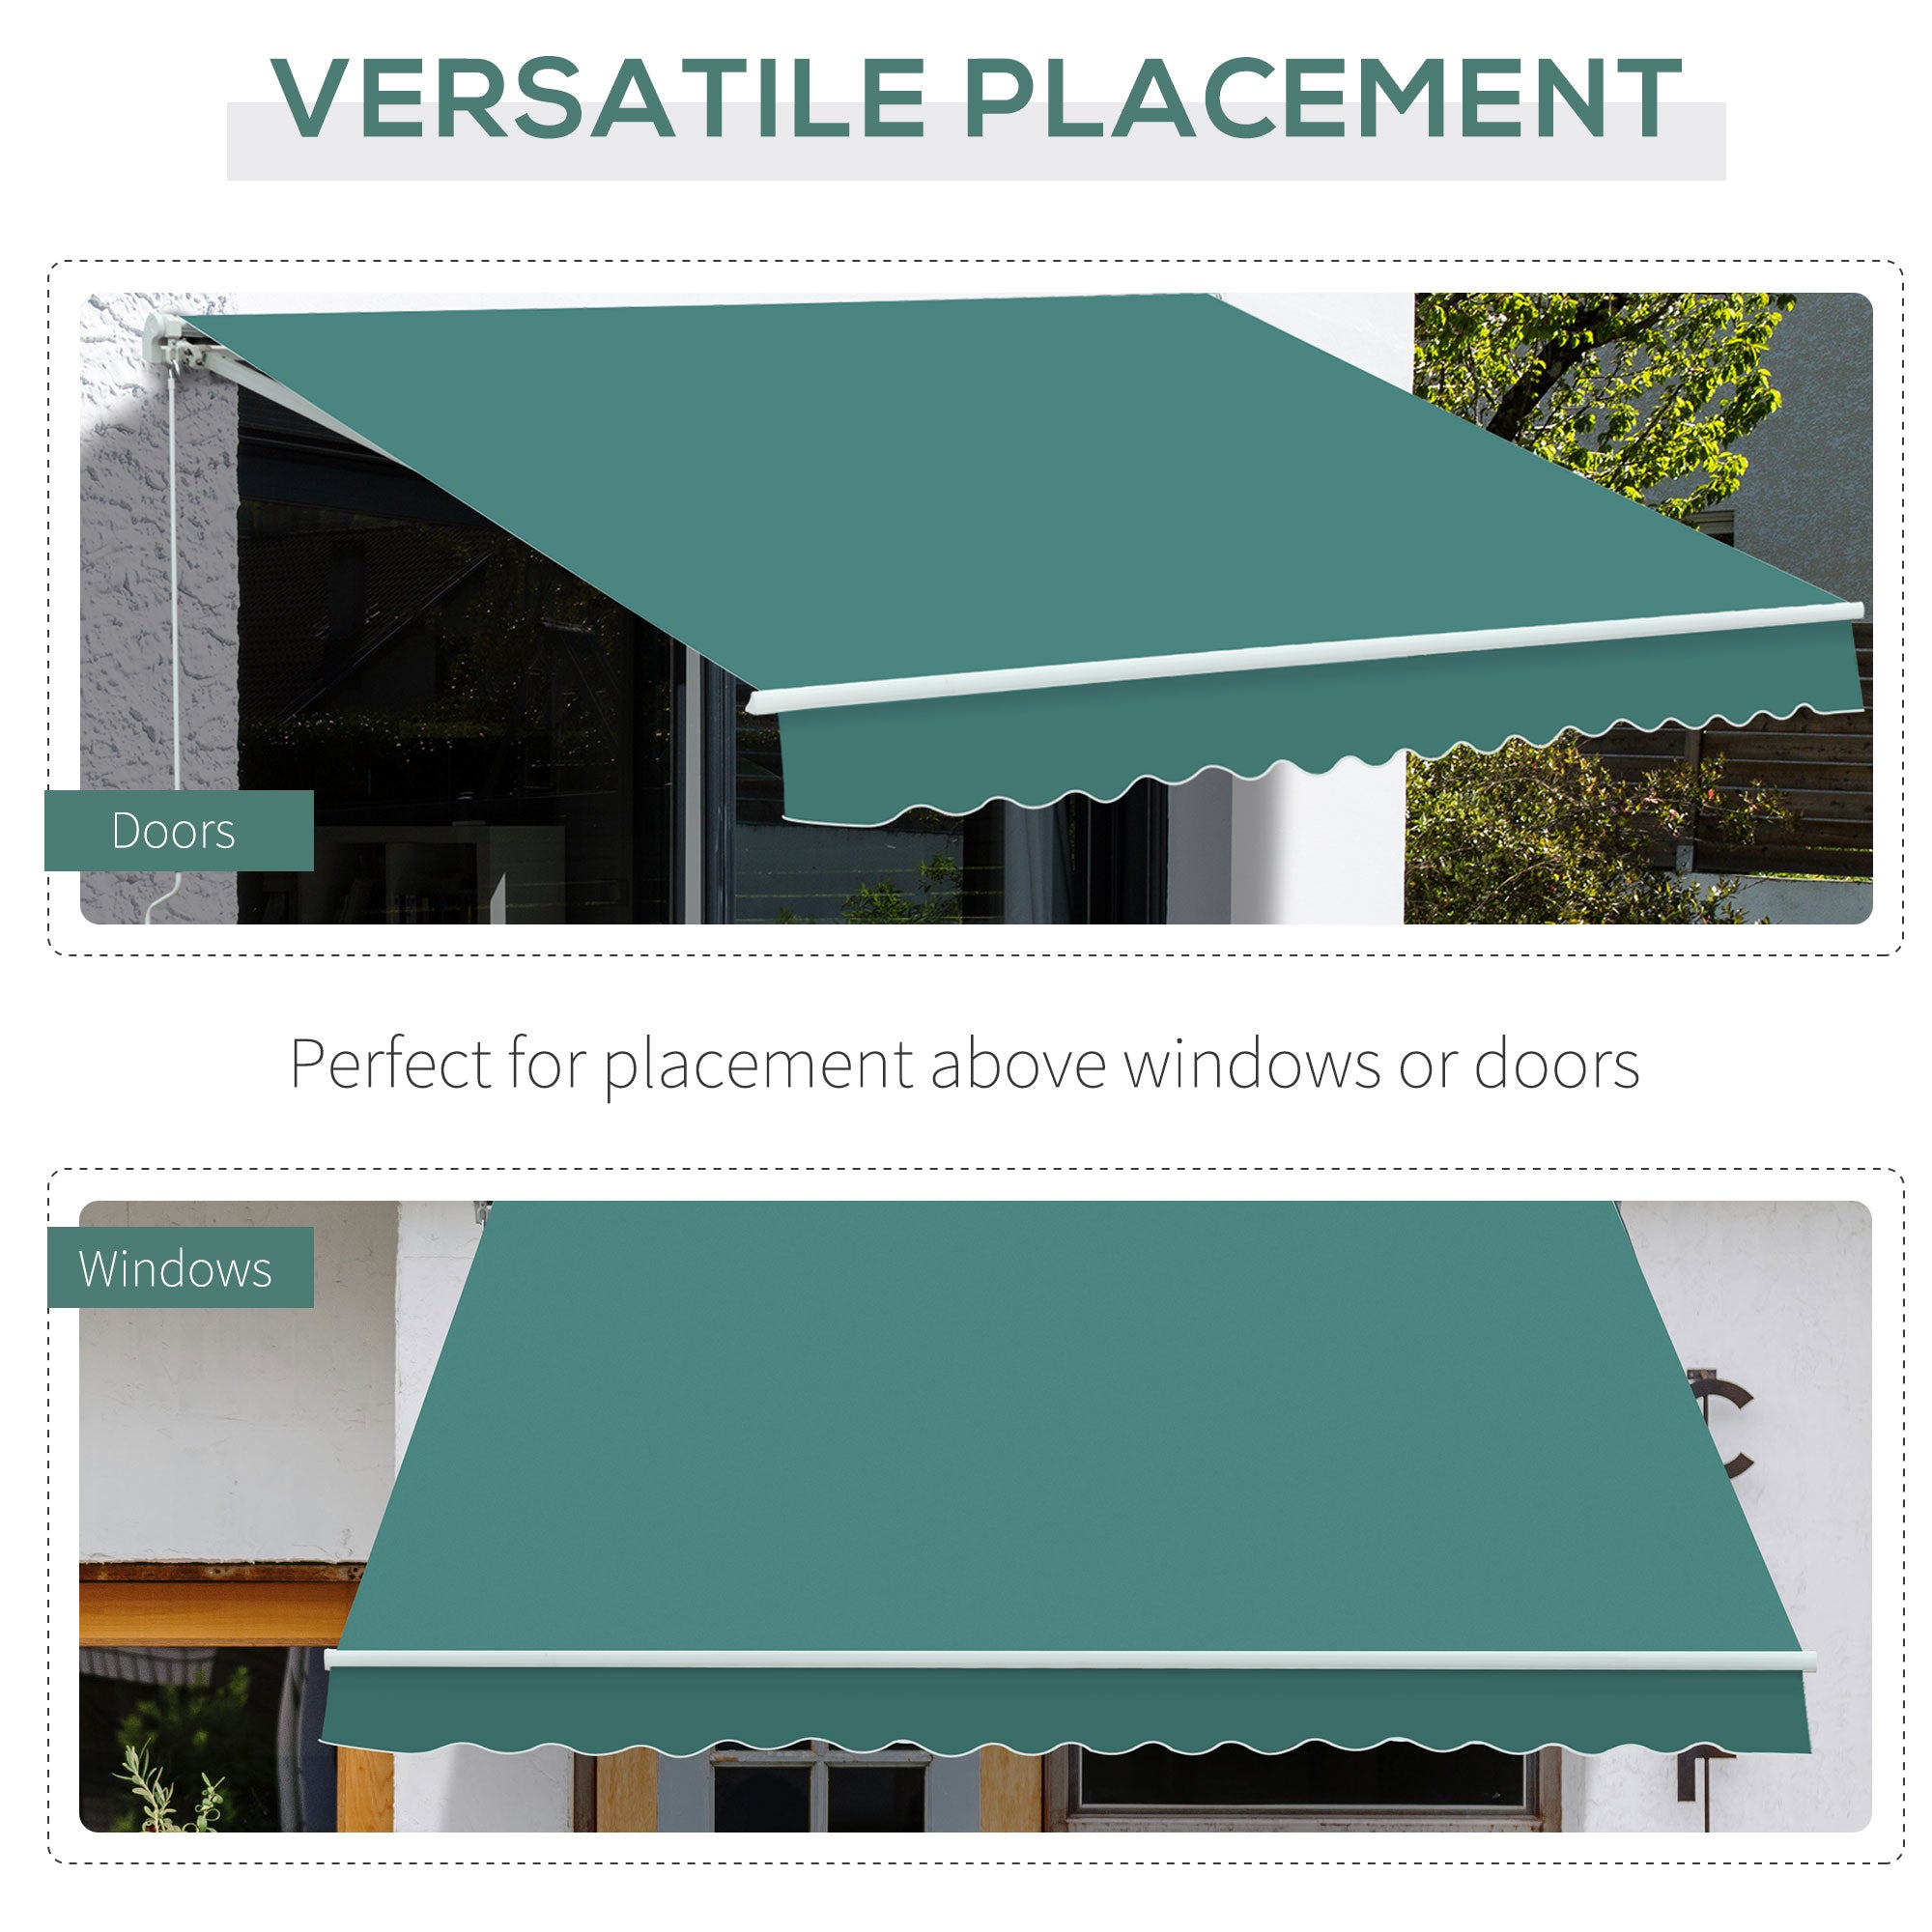 Outsunny 3.5 x 2.5 m Garden Patio Manual Awning Canopy Sun Shade Shelter with Winding Handle - Green - Inspirely